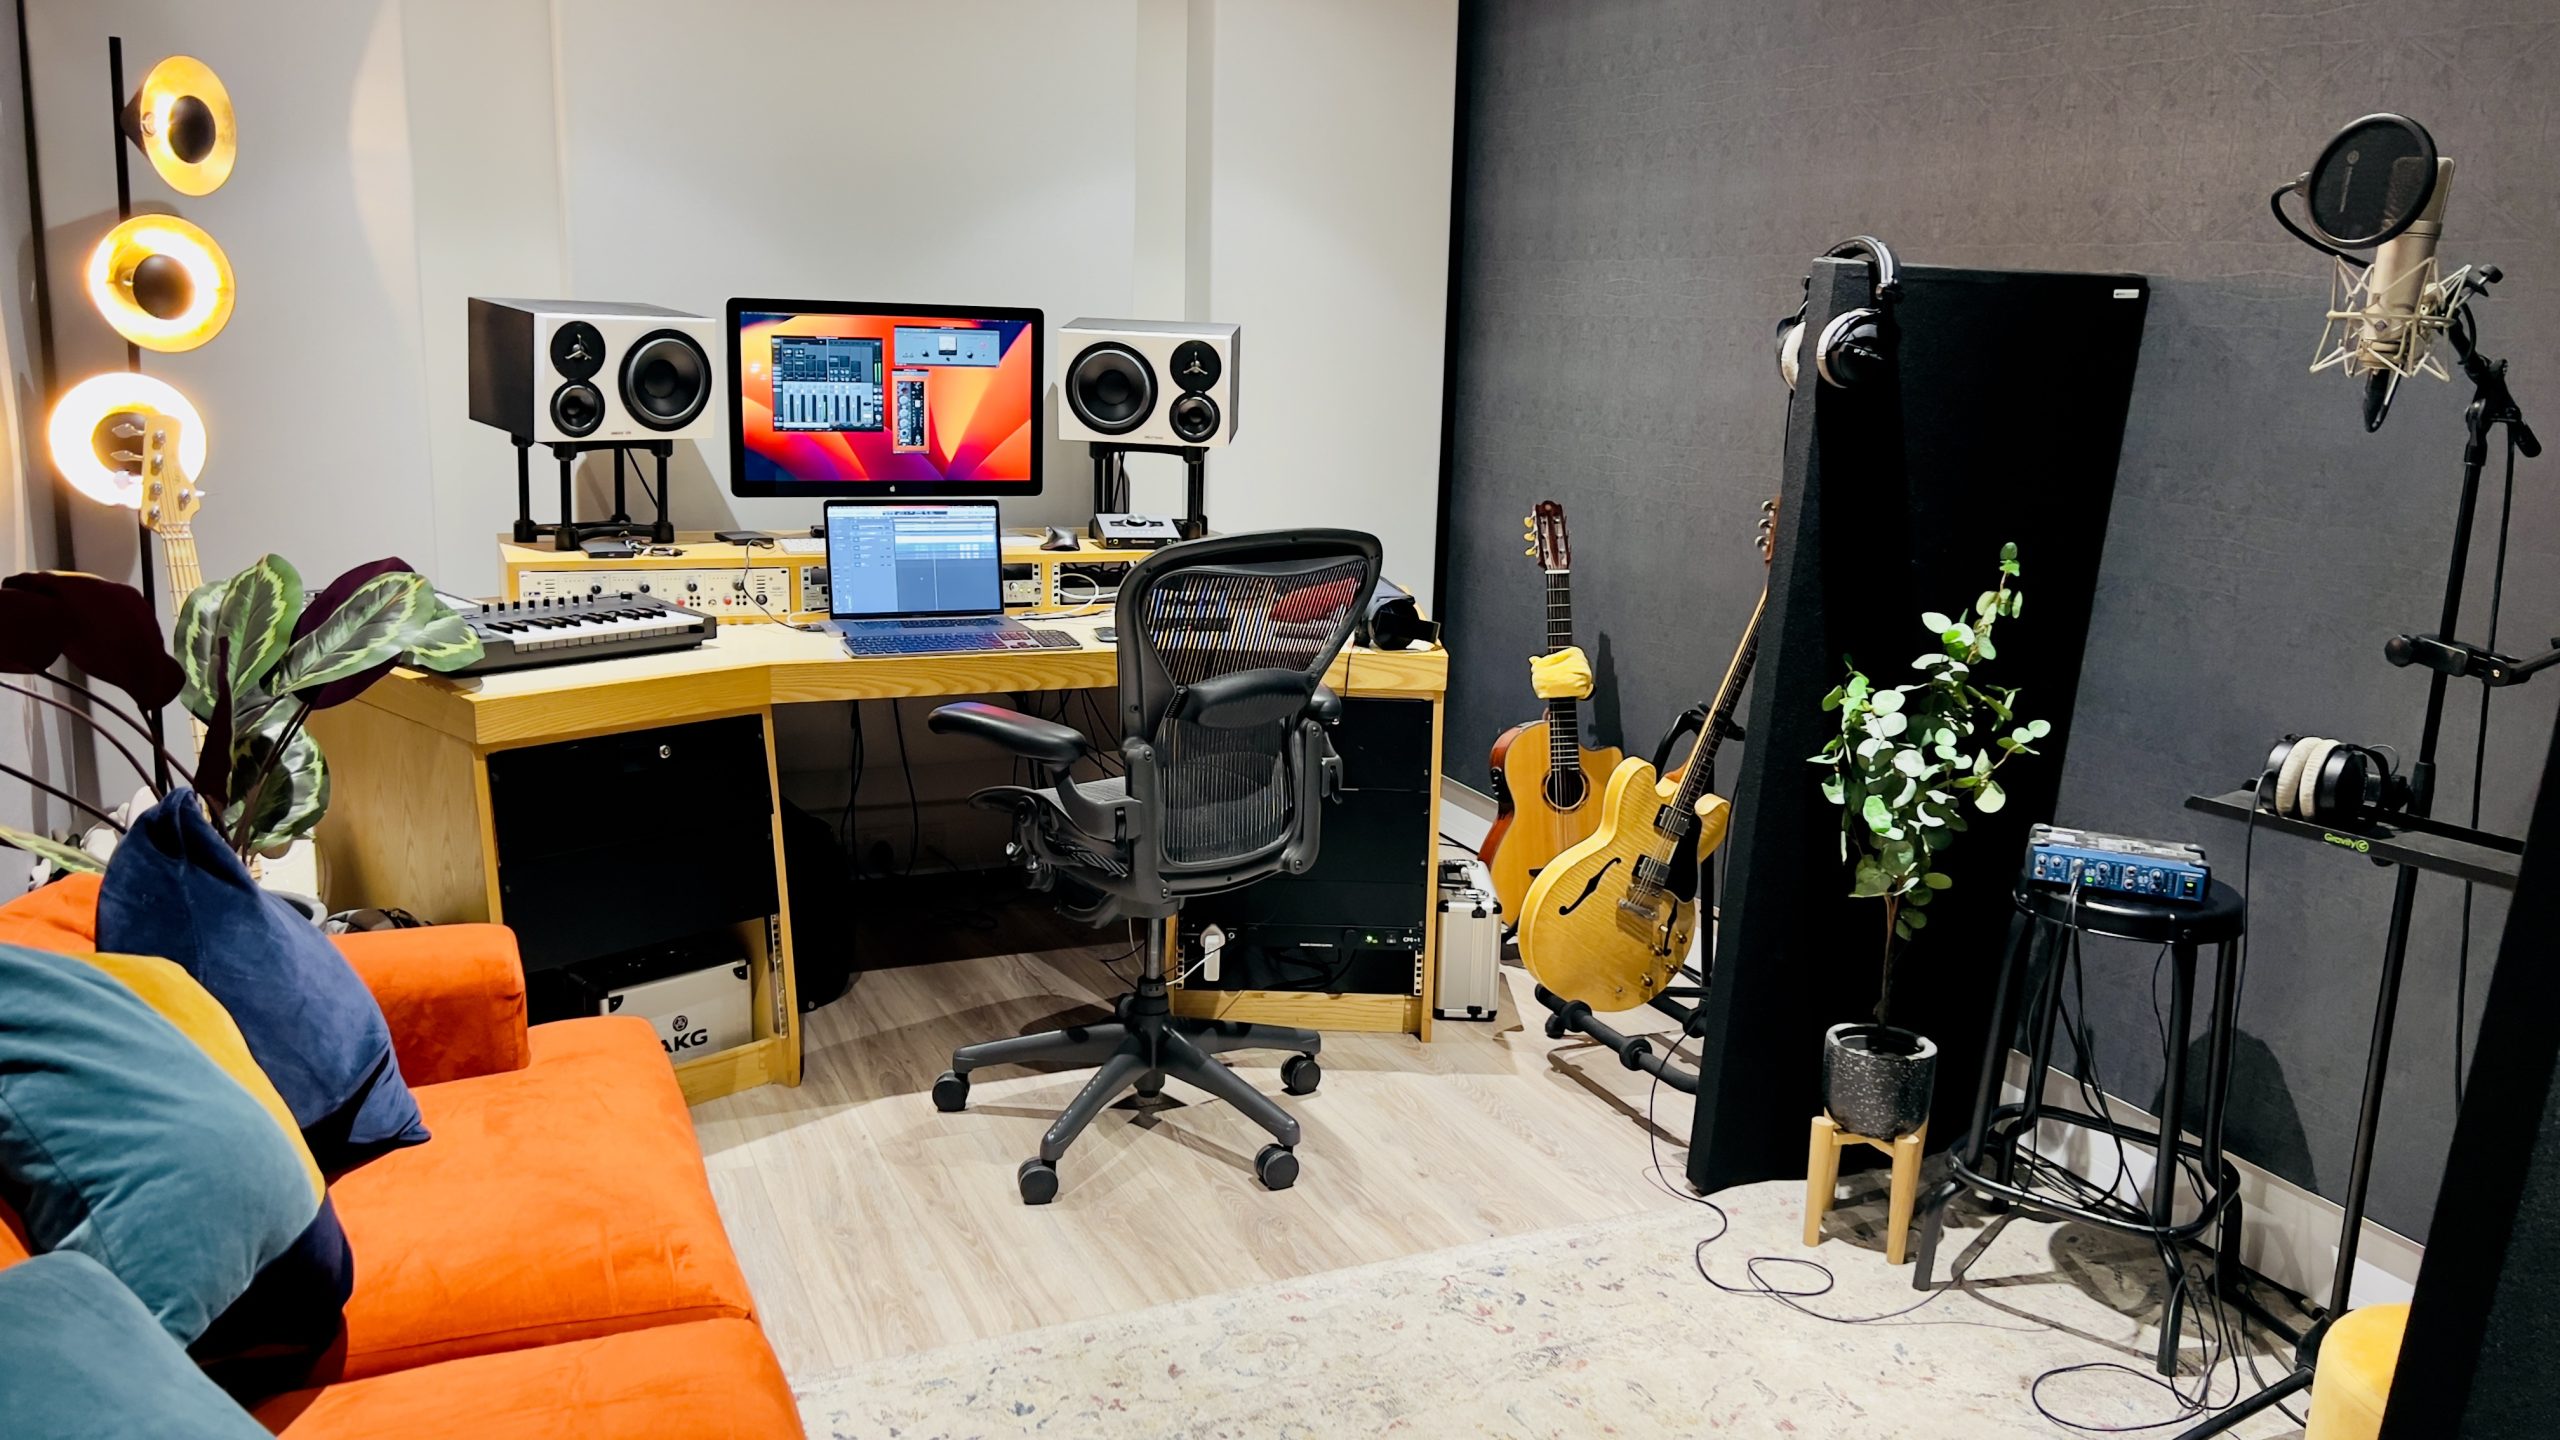 Vybrant Music production studio, based in West London.